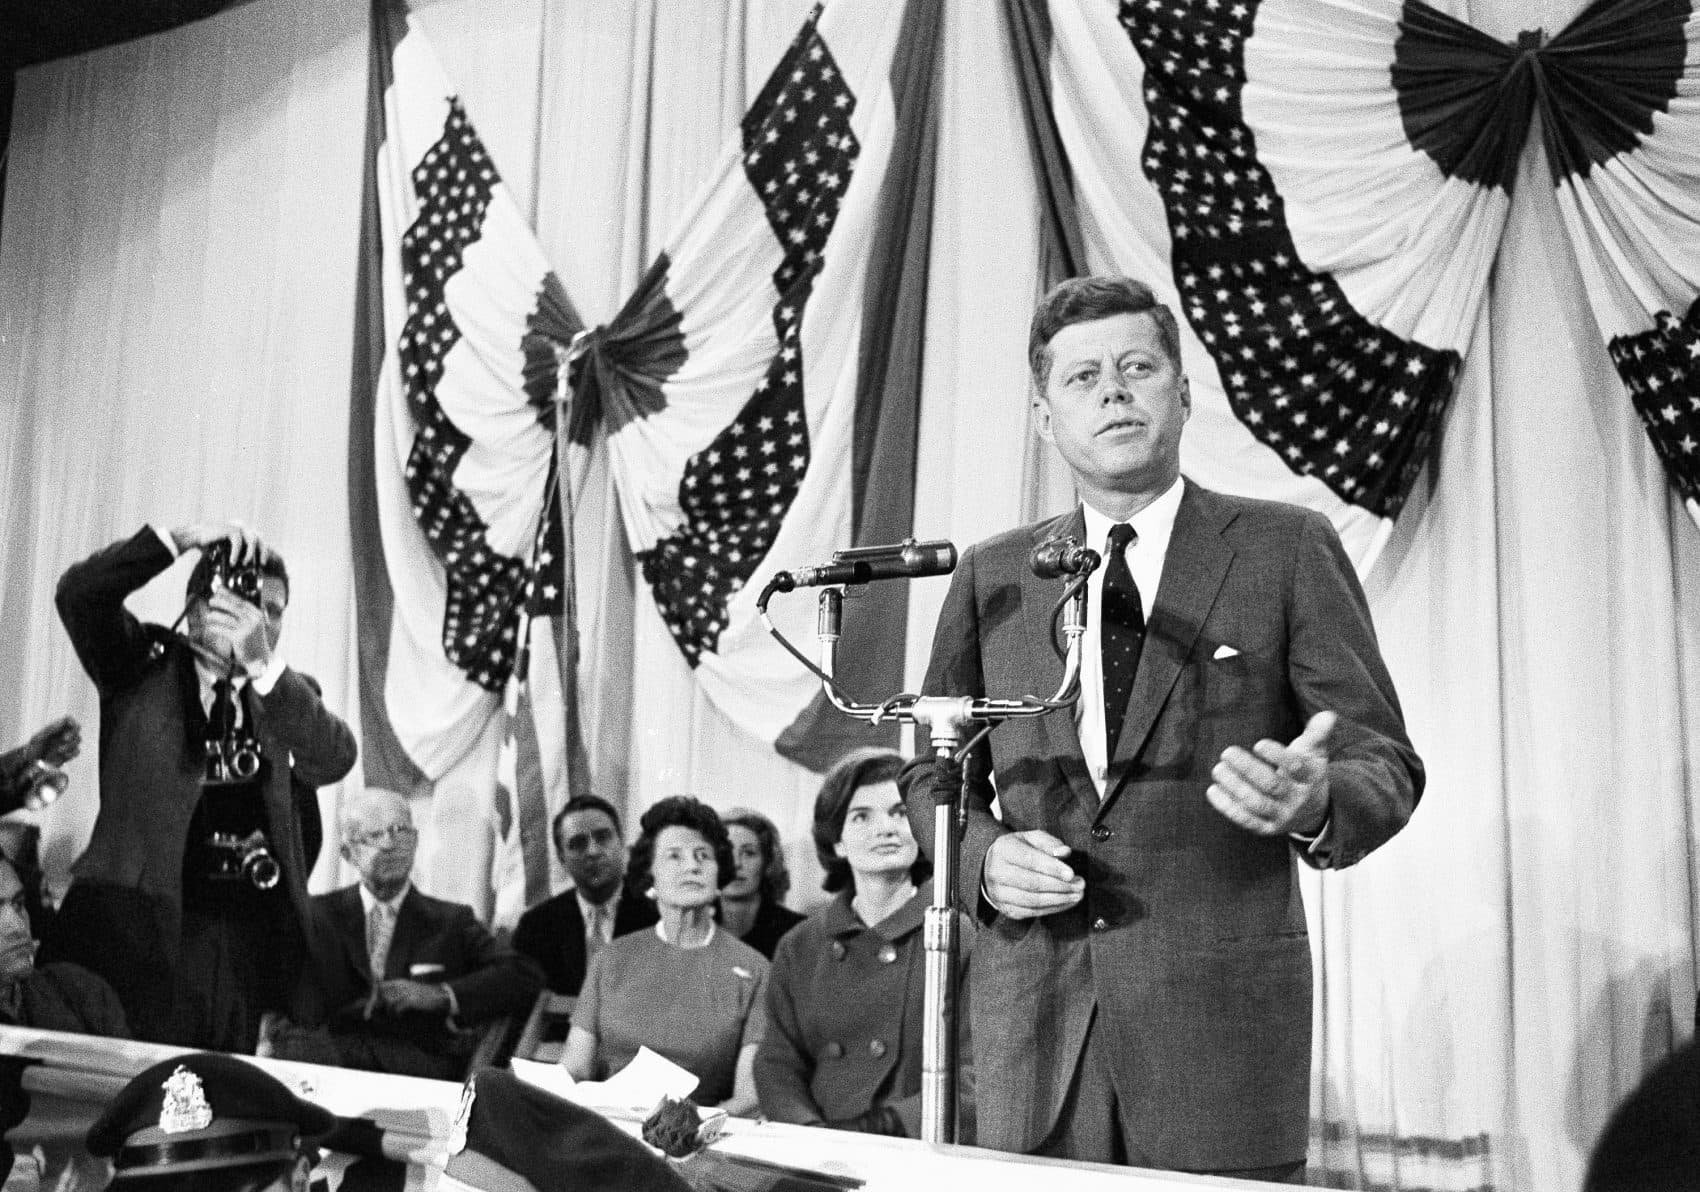 Sen. John F. Kennedy talks to newsmen, Nov. 9, 1960 at the Hyannis Armory, Mass., after his election to the presidency. (AP)